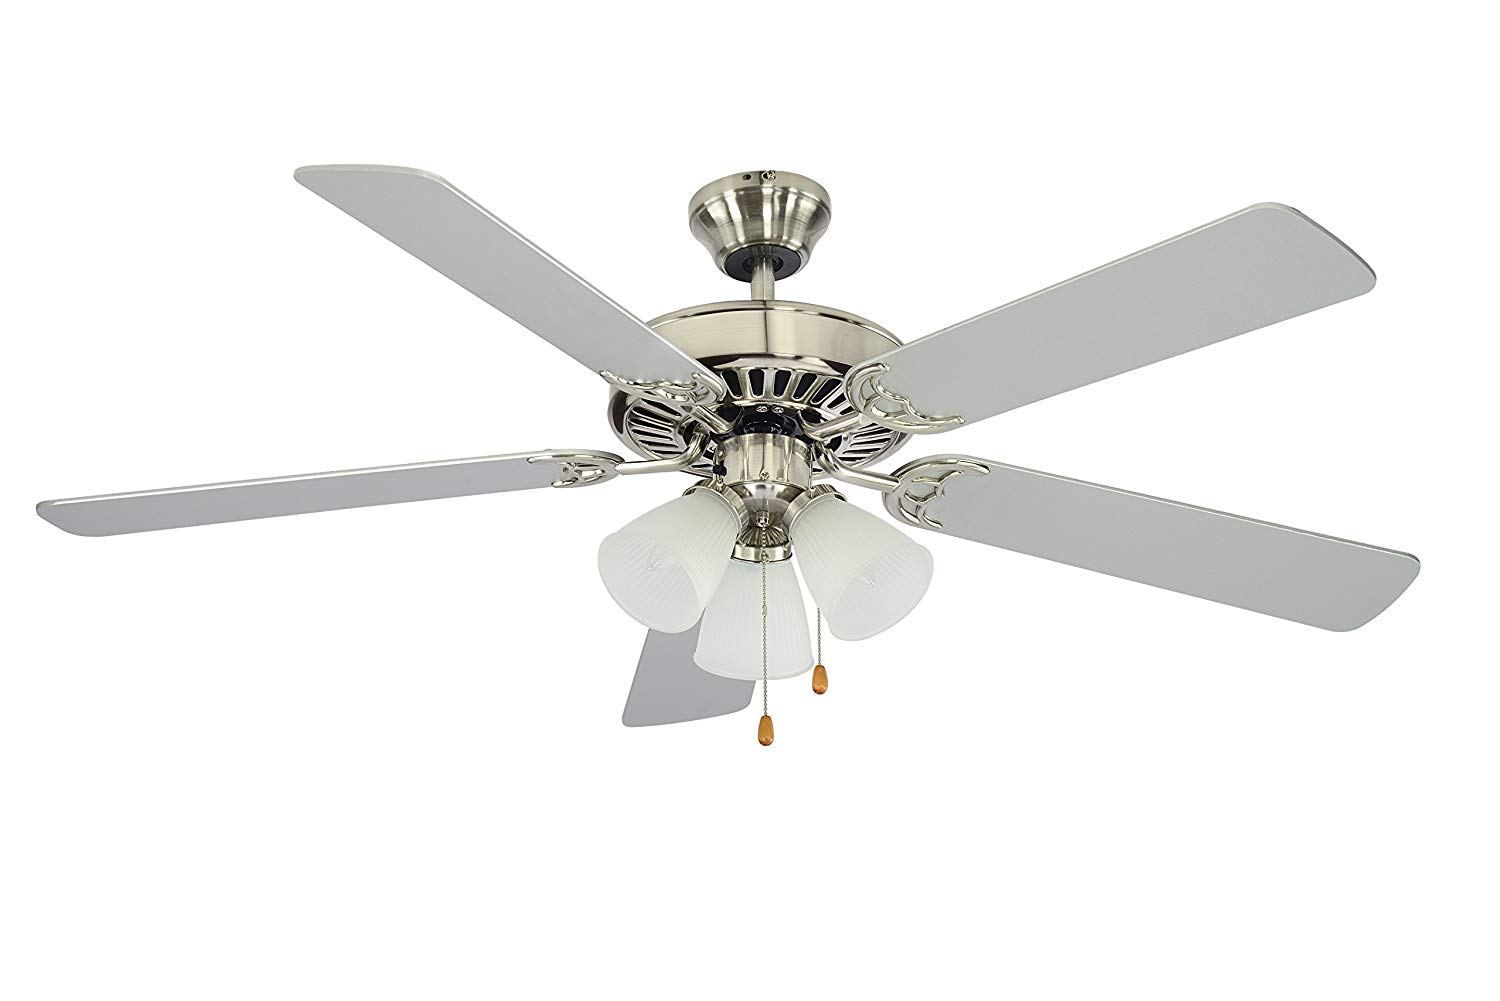 Trans Globe Lighting-F-1005 BN-Tempa Breeze - 52 Inch Ceiling Fan with Light Kit   Brushed Nickel Finish with Silver Blade Finish with White Frosted Glass